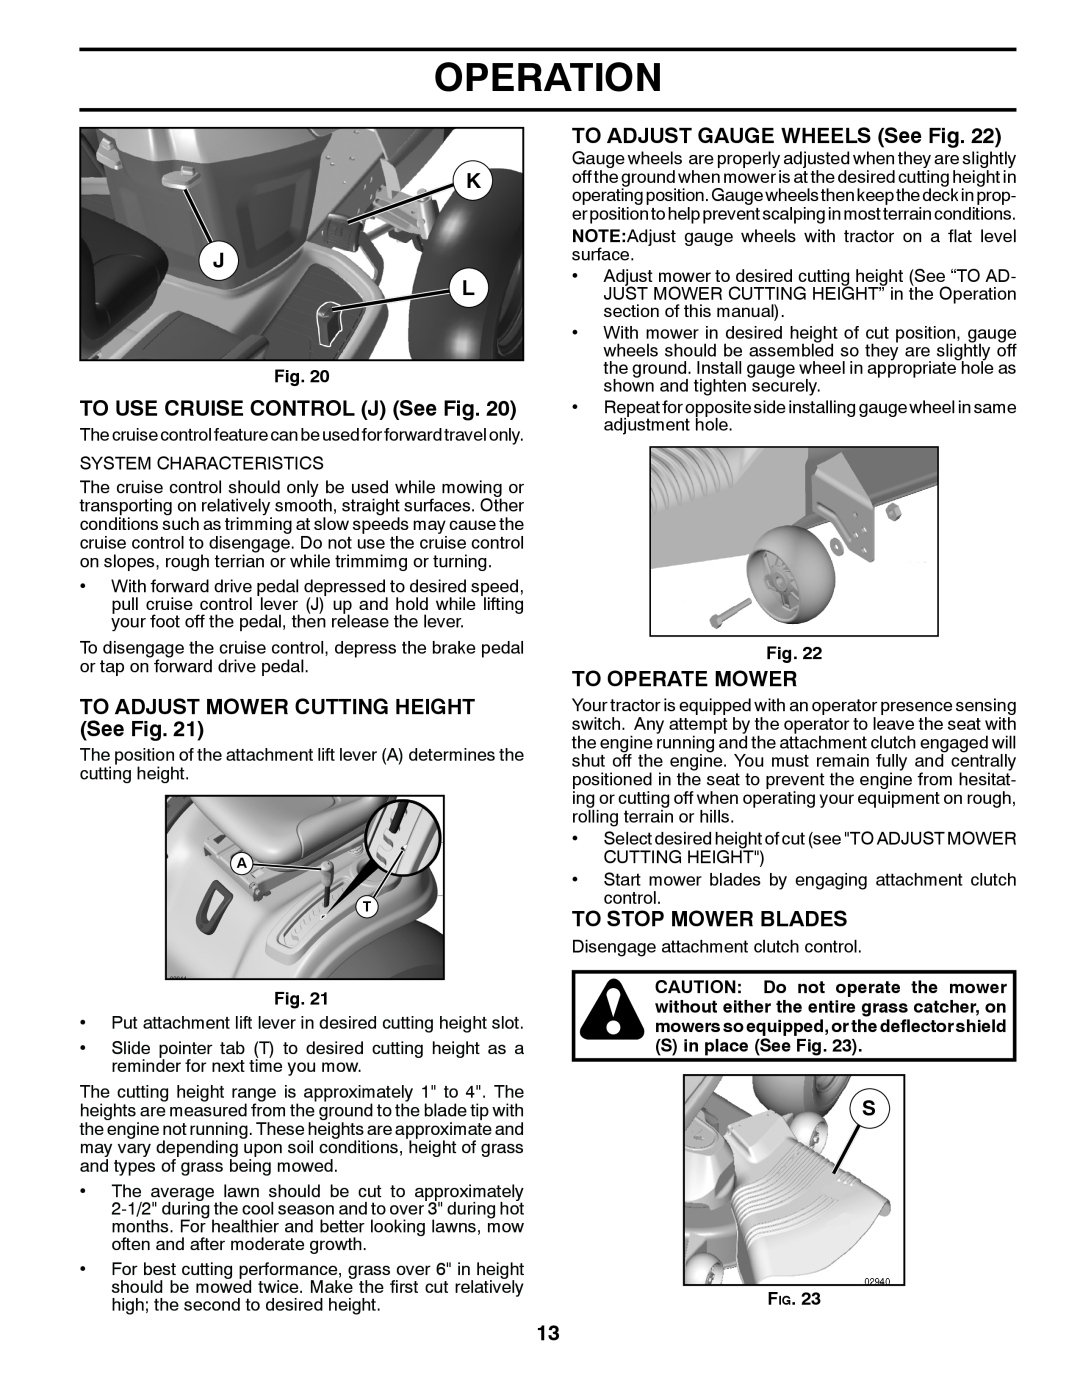 Poulan 96042011001 manual K J L, TO USE CRUISE CONTROL J See Fig, TO ADJUST MOWER CUTTING HEIGHT See Fig, To Operate Mower 